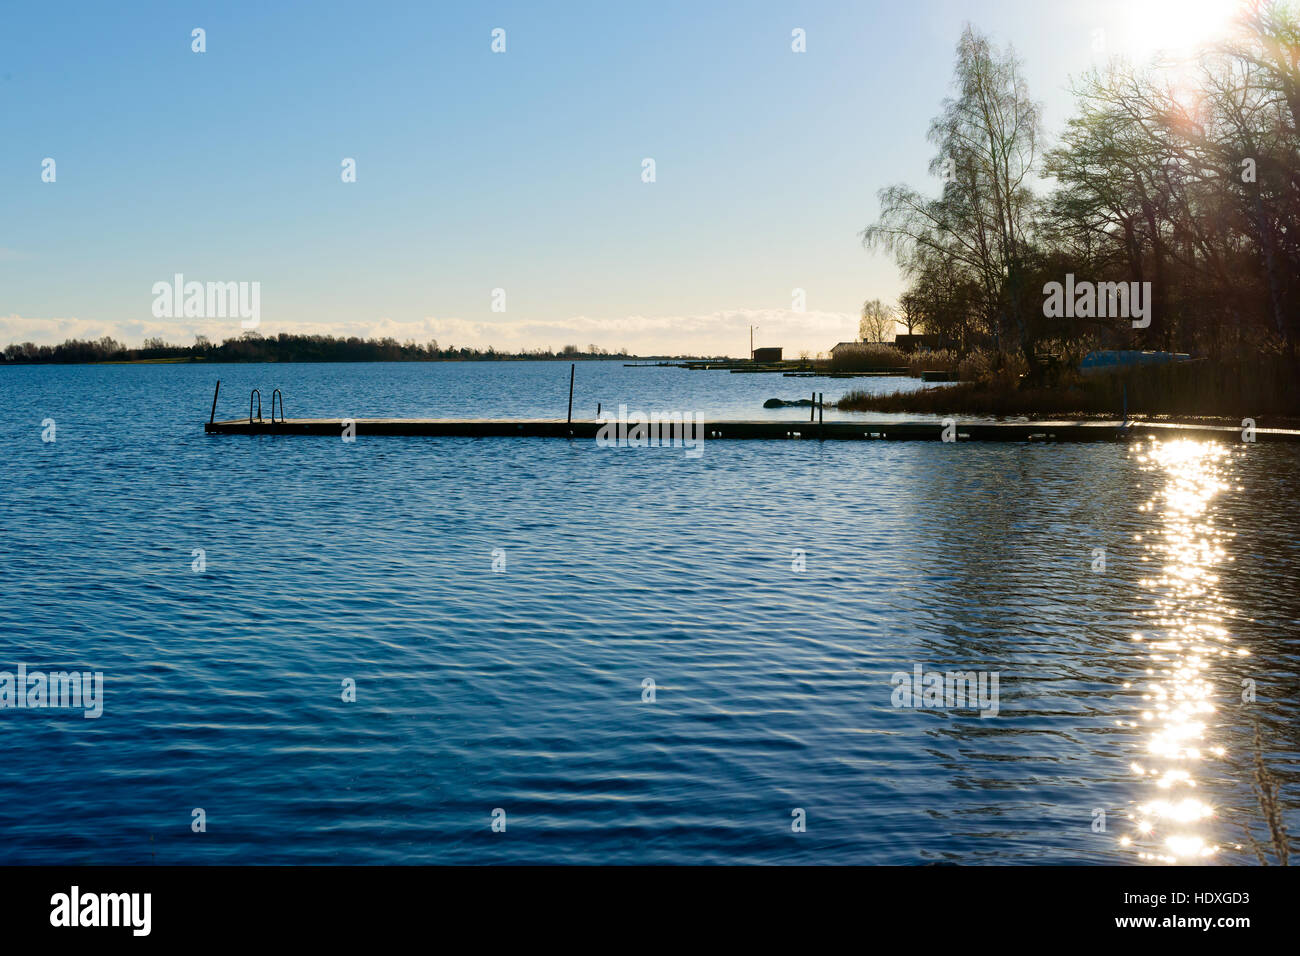 Backlit swimming pier in calm water. Sun and reflections visible over some trees. Stock Photo